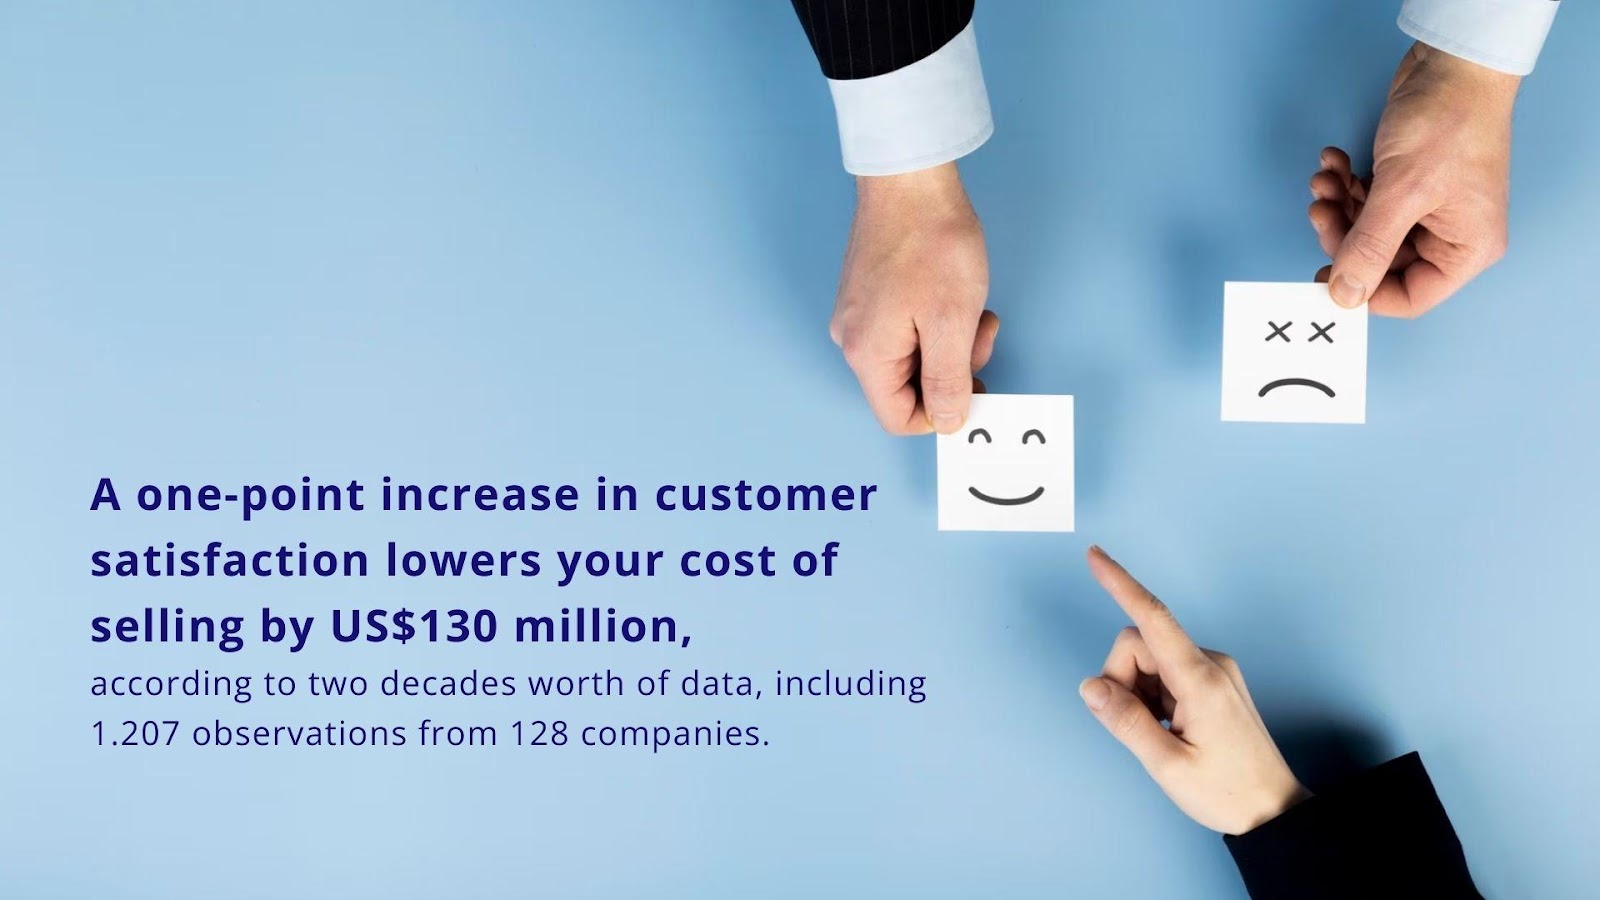 A one-point increase in customer satisfaction lowers your cost of selling by US$130 million, according to two decades' worth of data, including 1.207 observations from 128 companies.